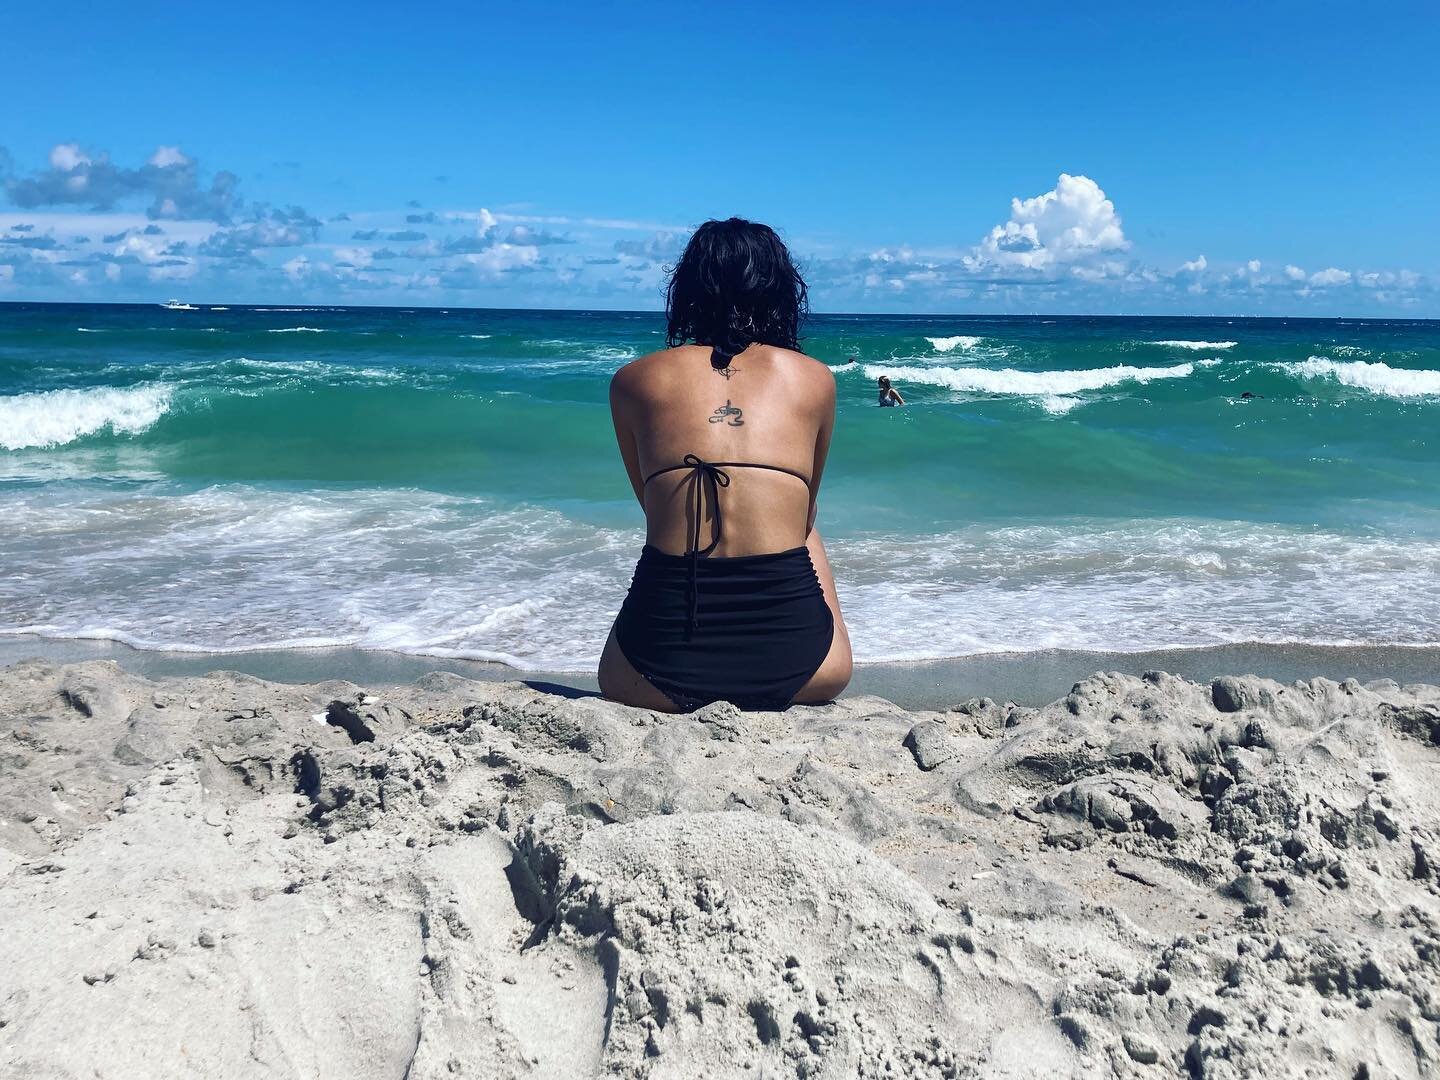 Wilmington and @breanacymone went and made me into a beach girl 🌊 🌞 🌊 
Also I just finished readin @fariha_roisin 's book #whatiswellness for and it's been a deeply deeply moving and healing read. If you're South Asian, Muslim, queer, all of those